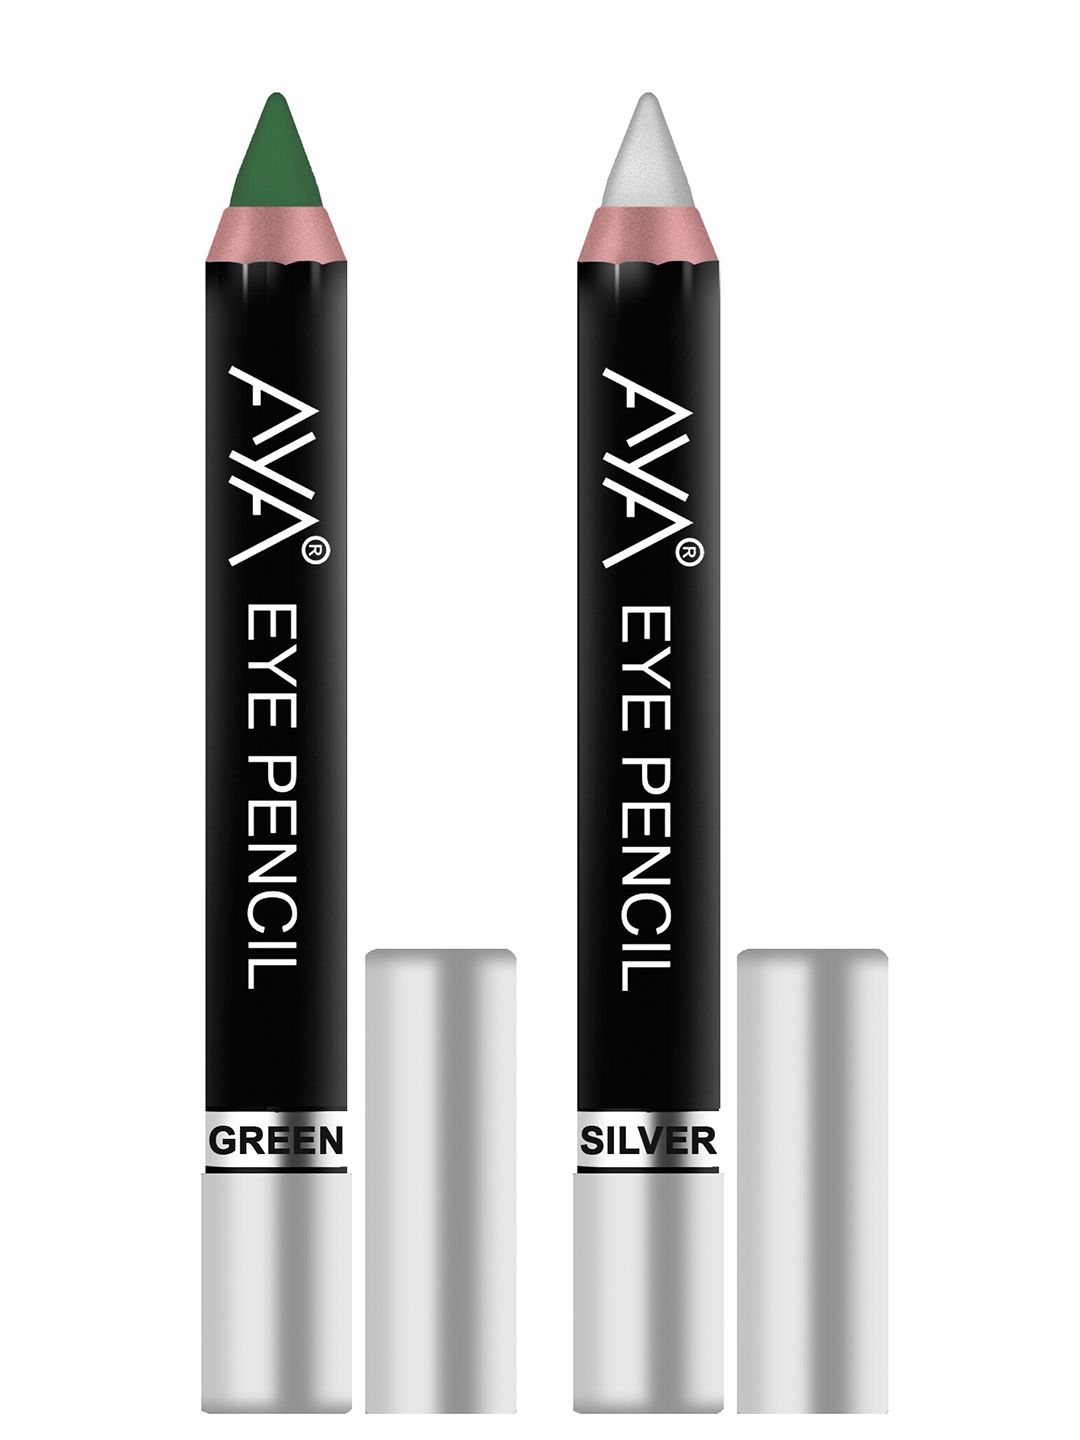 AYA Set of 2 Eye Liner Kajal Pencils in Green and Silver Price in India